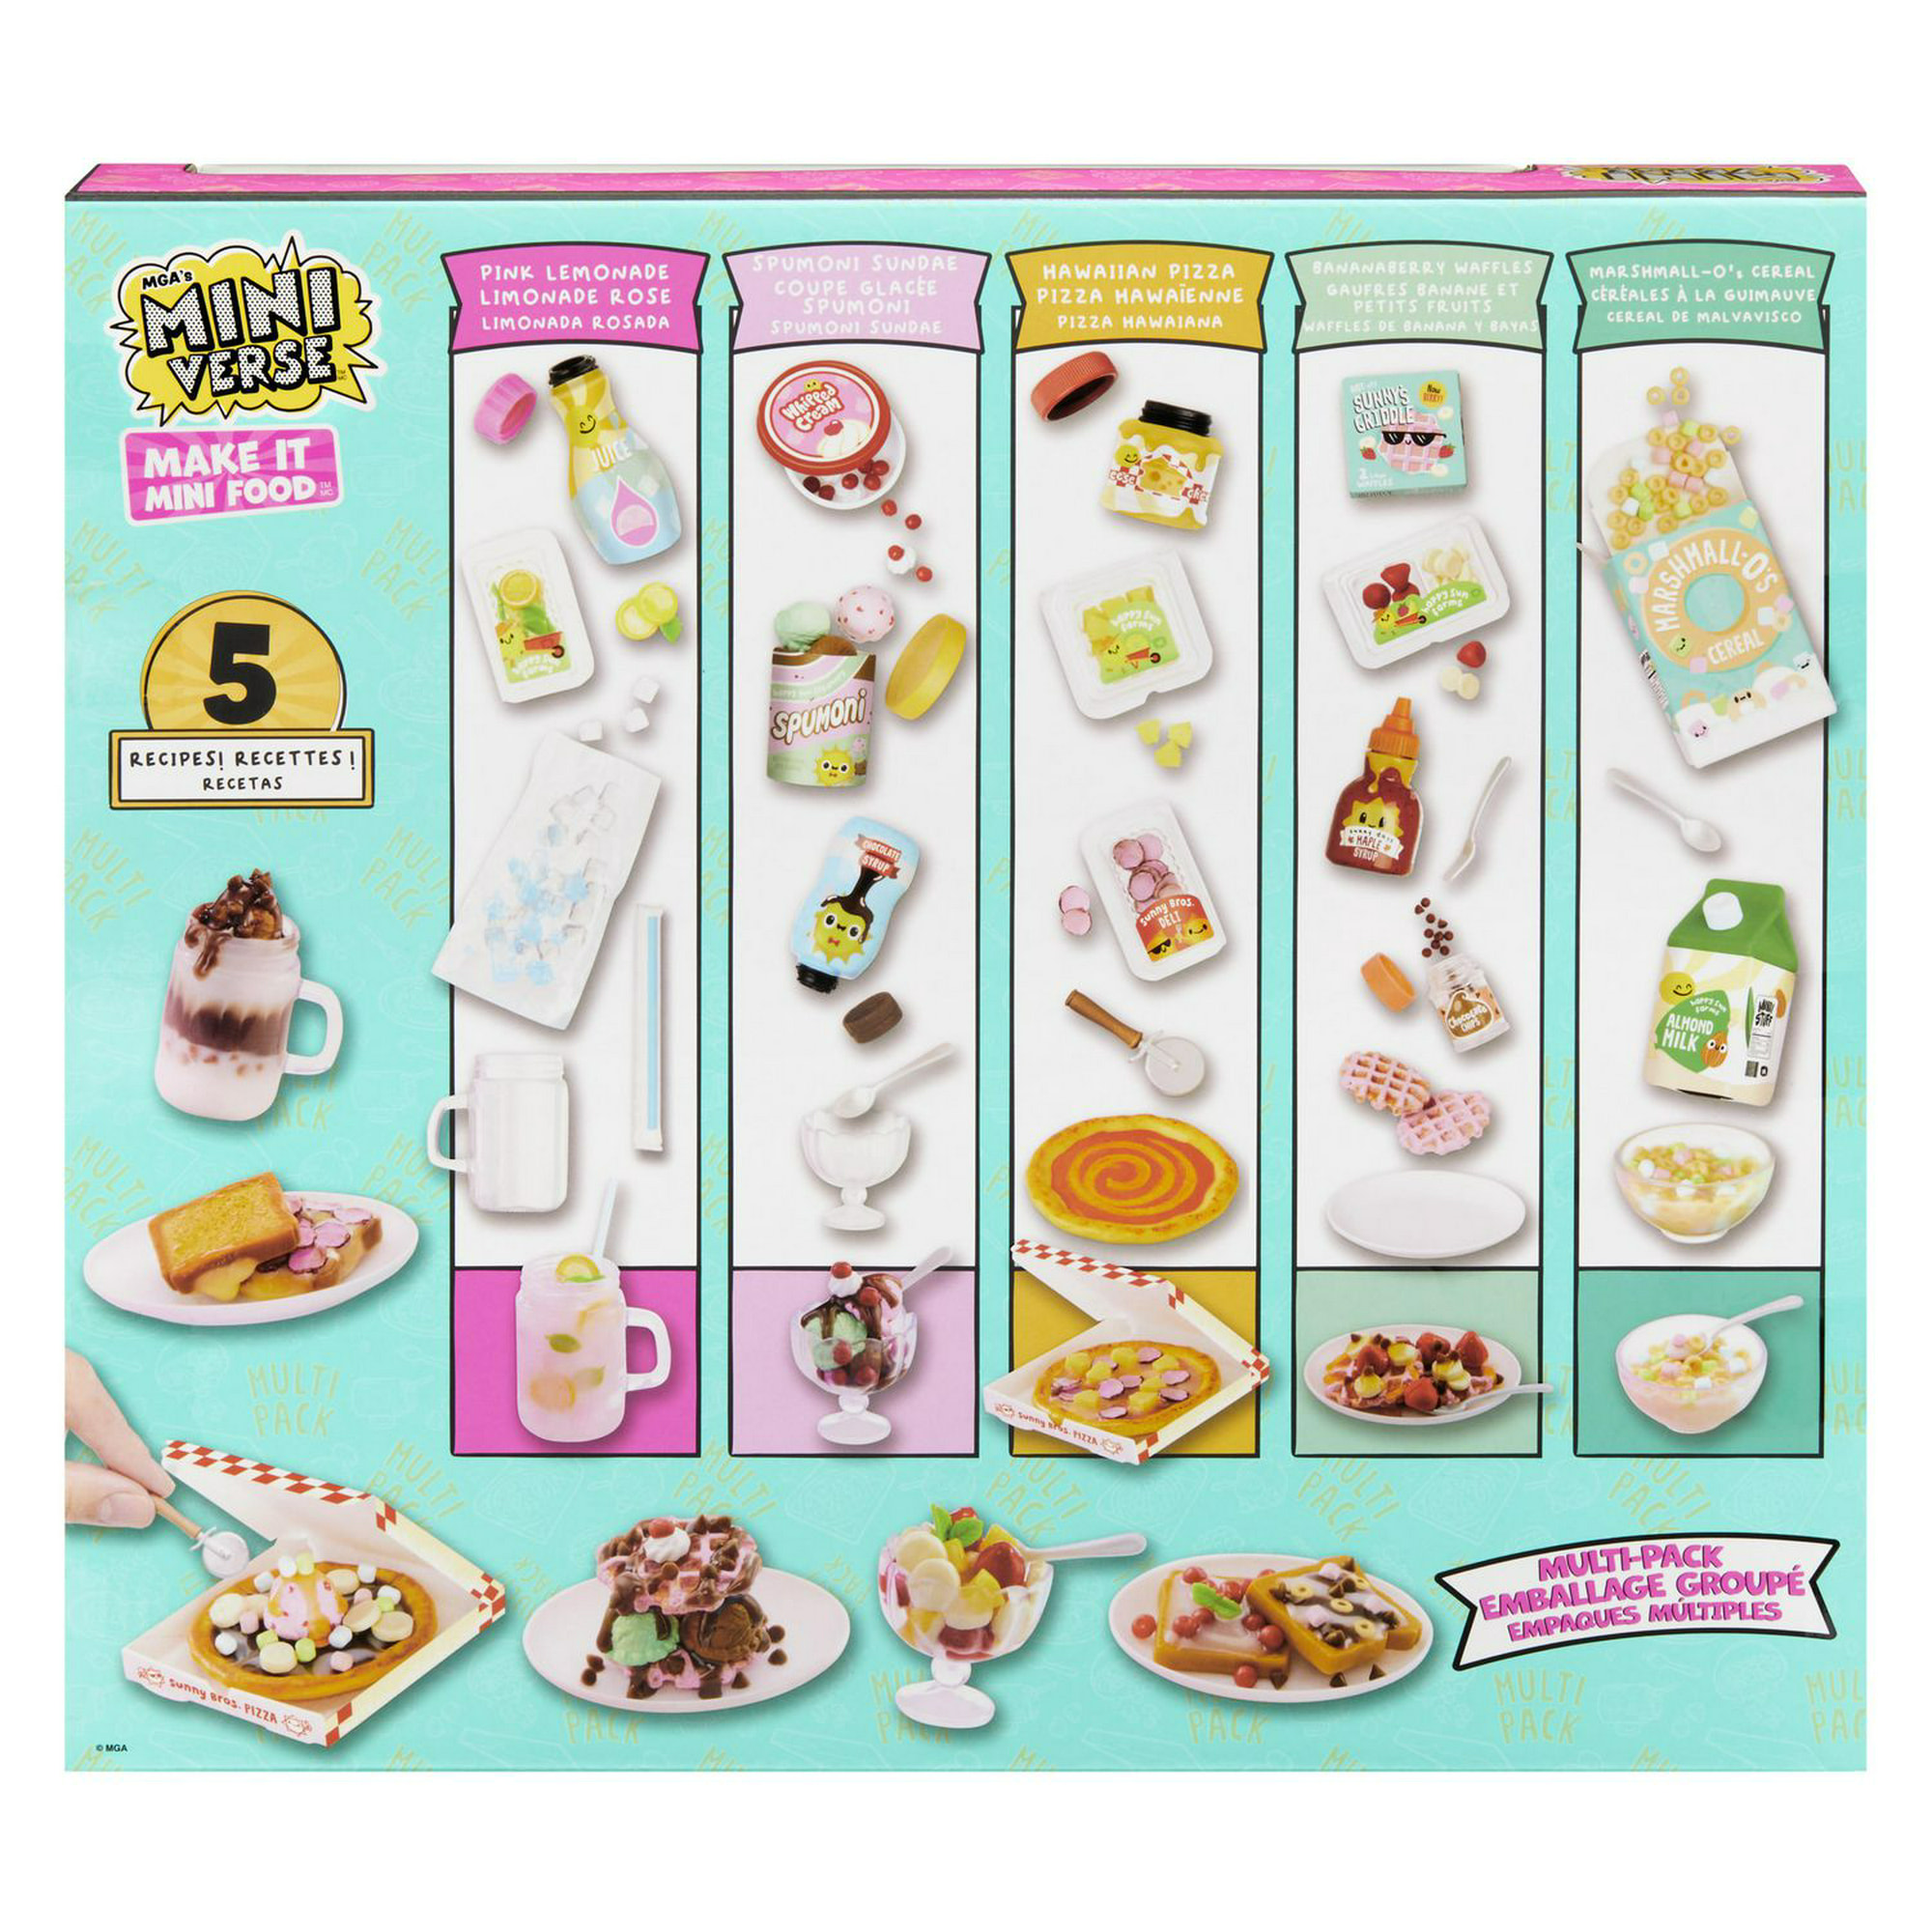 Make It Mini Food Multipack MGA's Miniverse, Collectibles, DIY, Resin Play,  Replica Food, NOT EDIBLE, 8+, COLLECT THEM ALL 